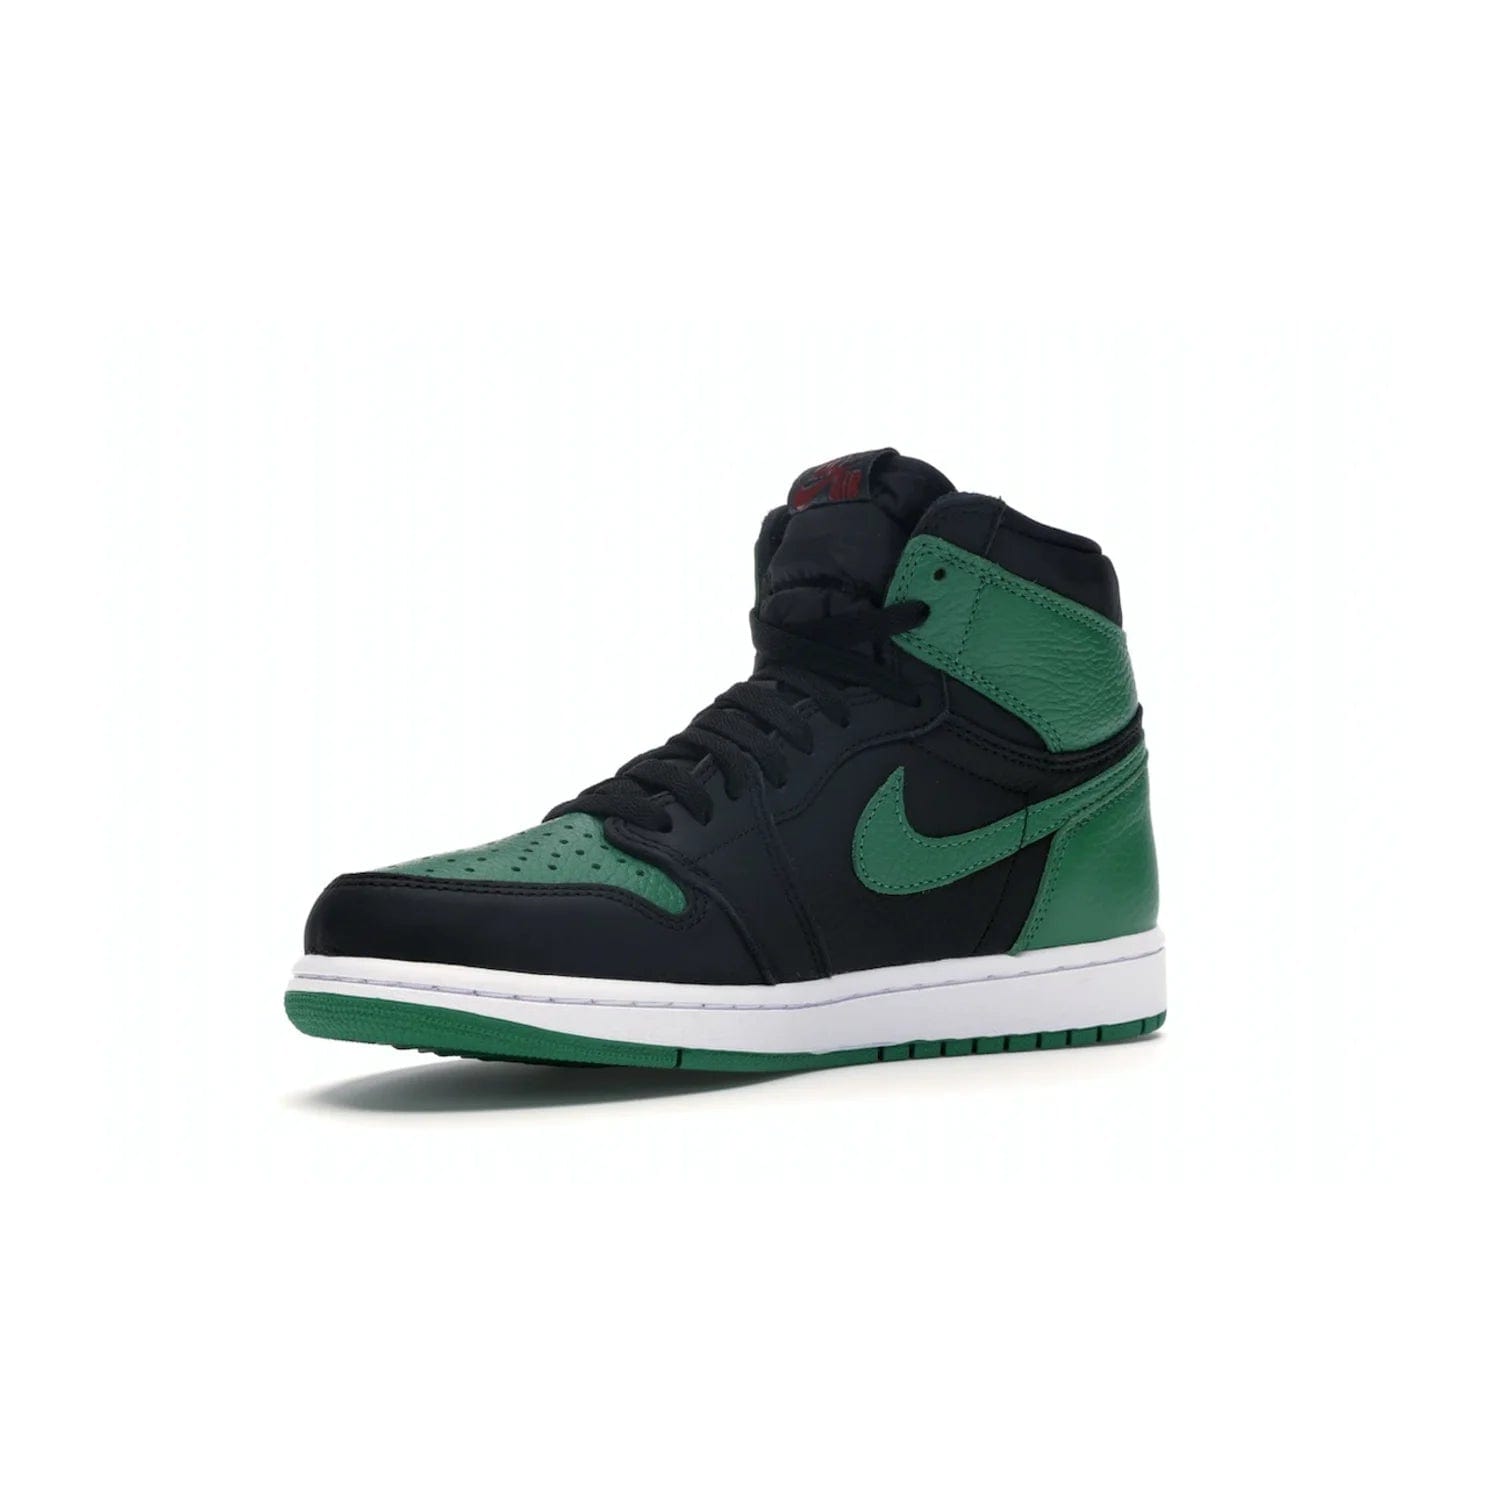 Jordan 1 Retro High Pine Green Black - Image 15 - Only at www.BallersClubKickz.com - Step into fresh style with the Jordan 1 Retro High Pine Green Black. Combining a black tumbled leather upper with green leather overlays, this sneaker features a Gym Red embroidered tongue tag, sail midsole, and pine green outsole for iconic style with a unique twist.